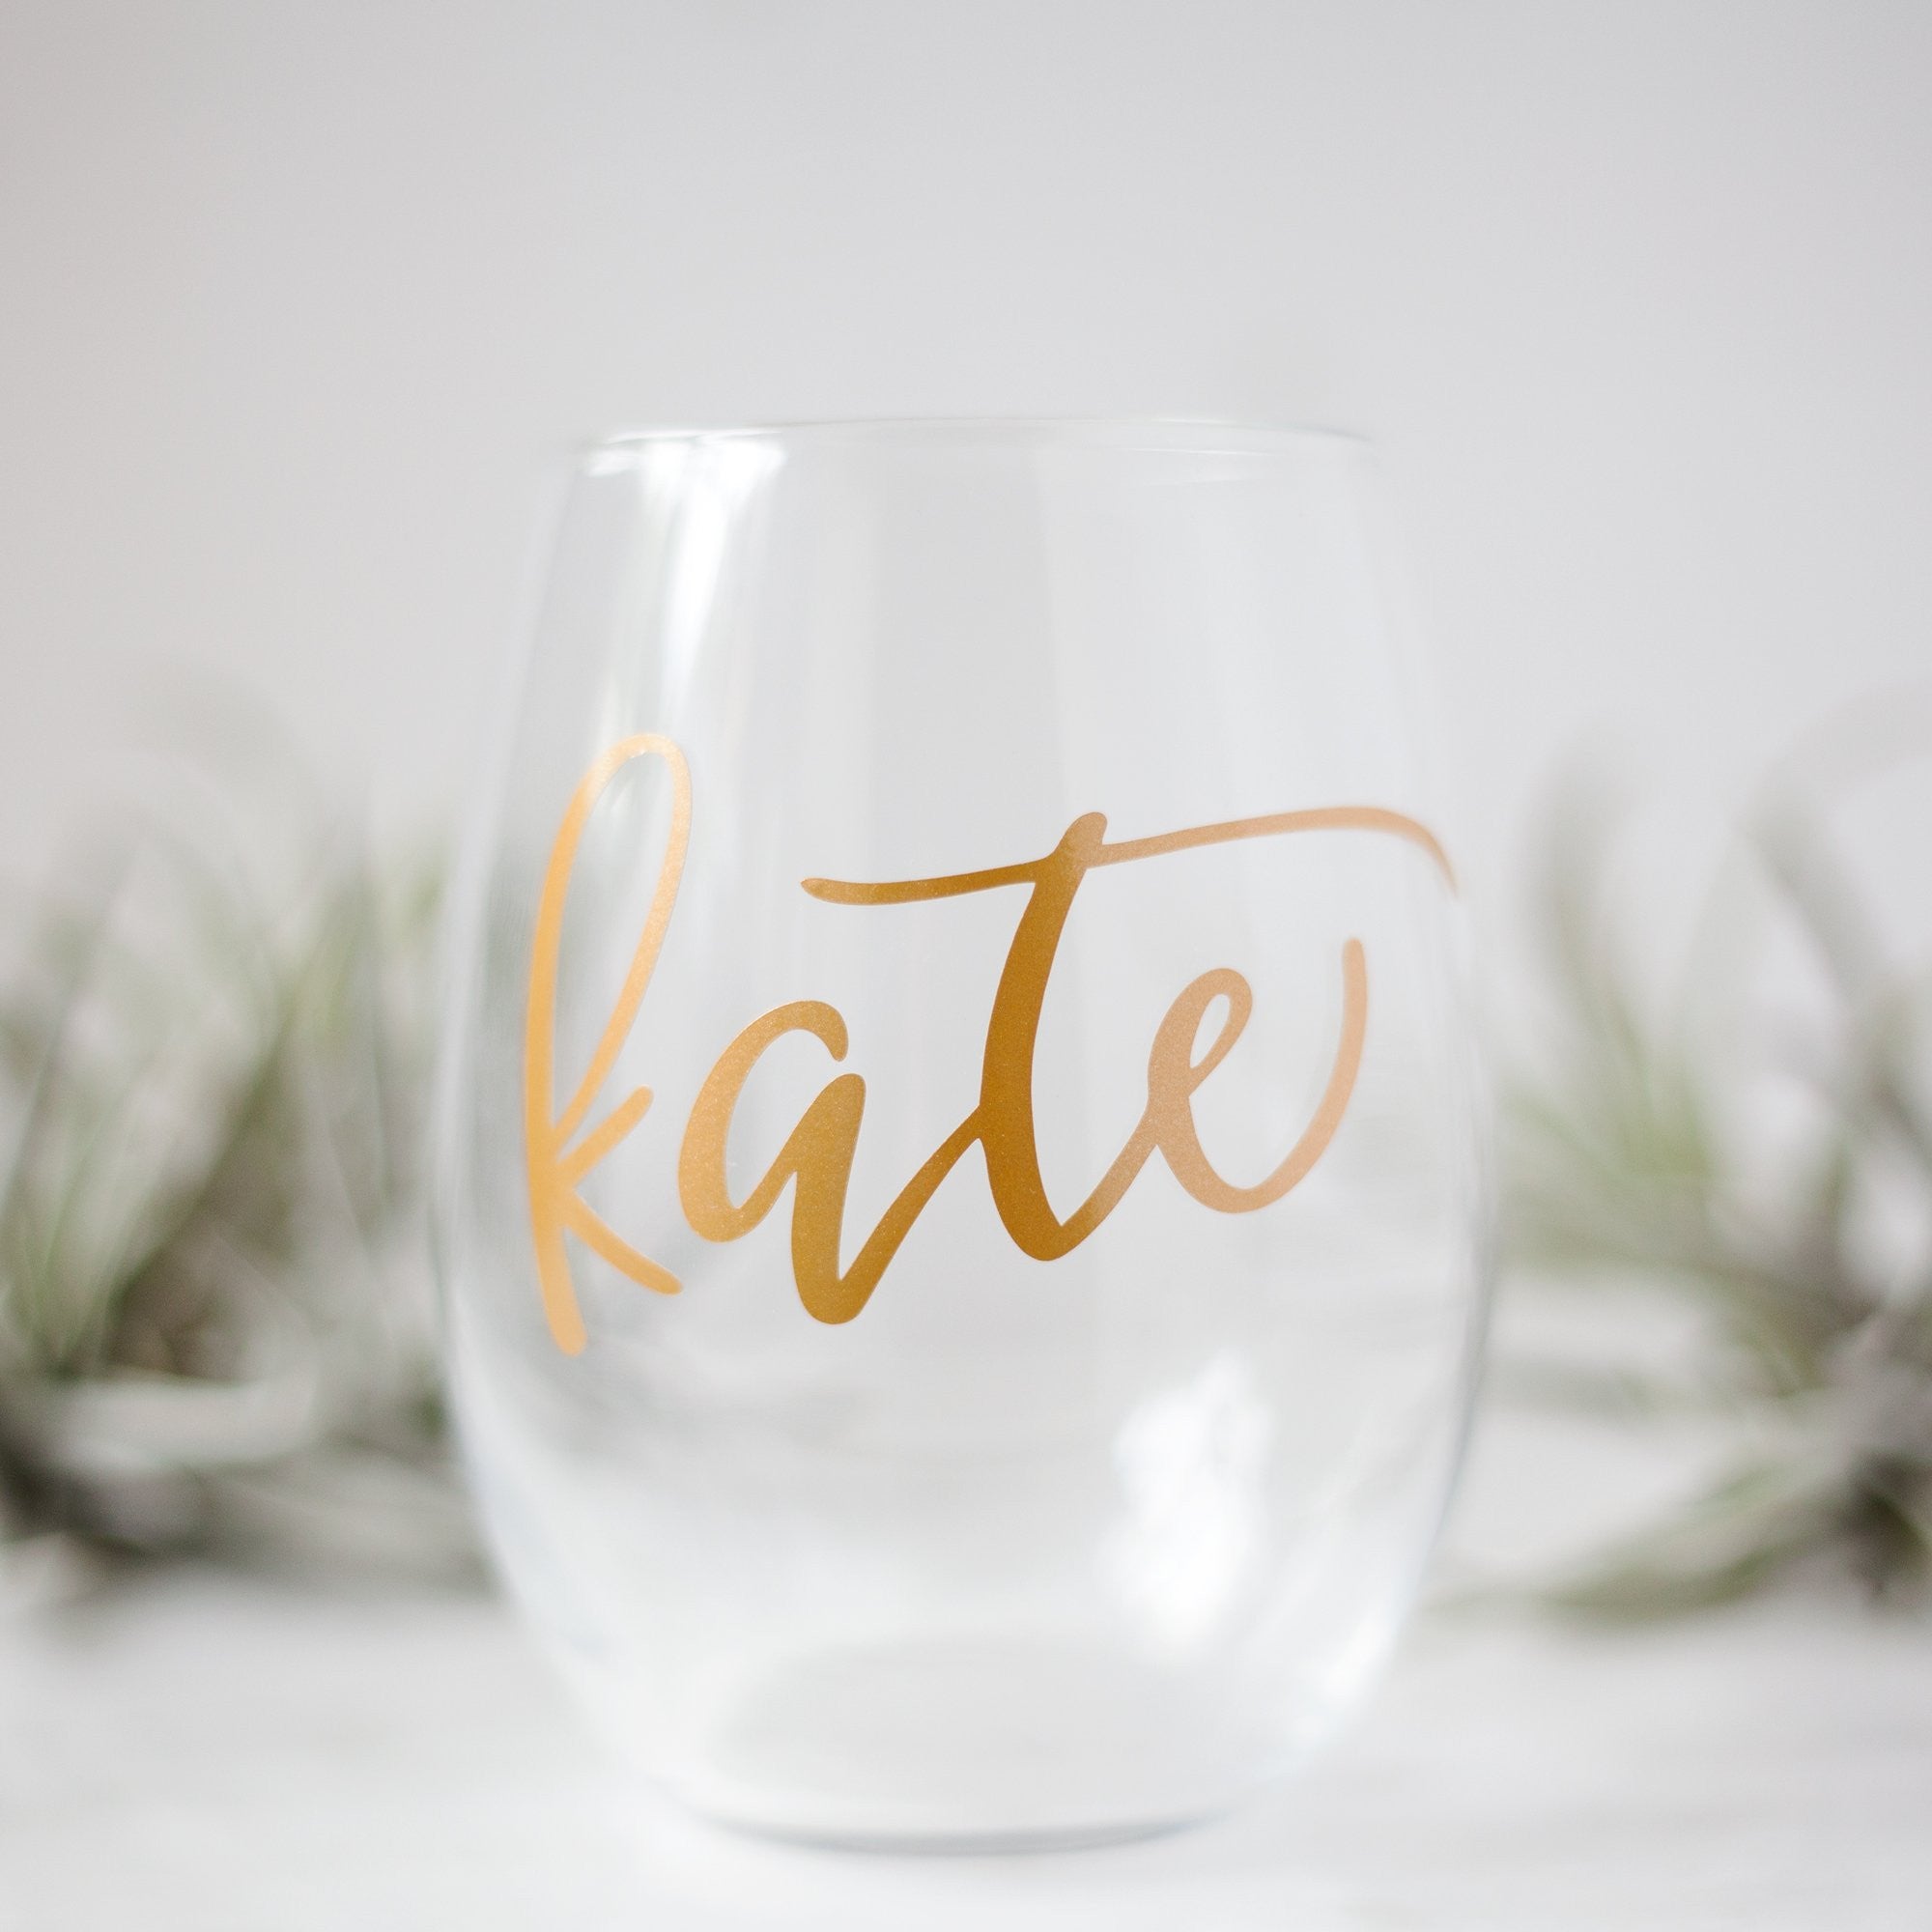 Stemless Wine Glass personalised with name, engraved glasses Mothers day  gift for her, Custom wine gift for mum unique gifts for women